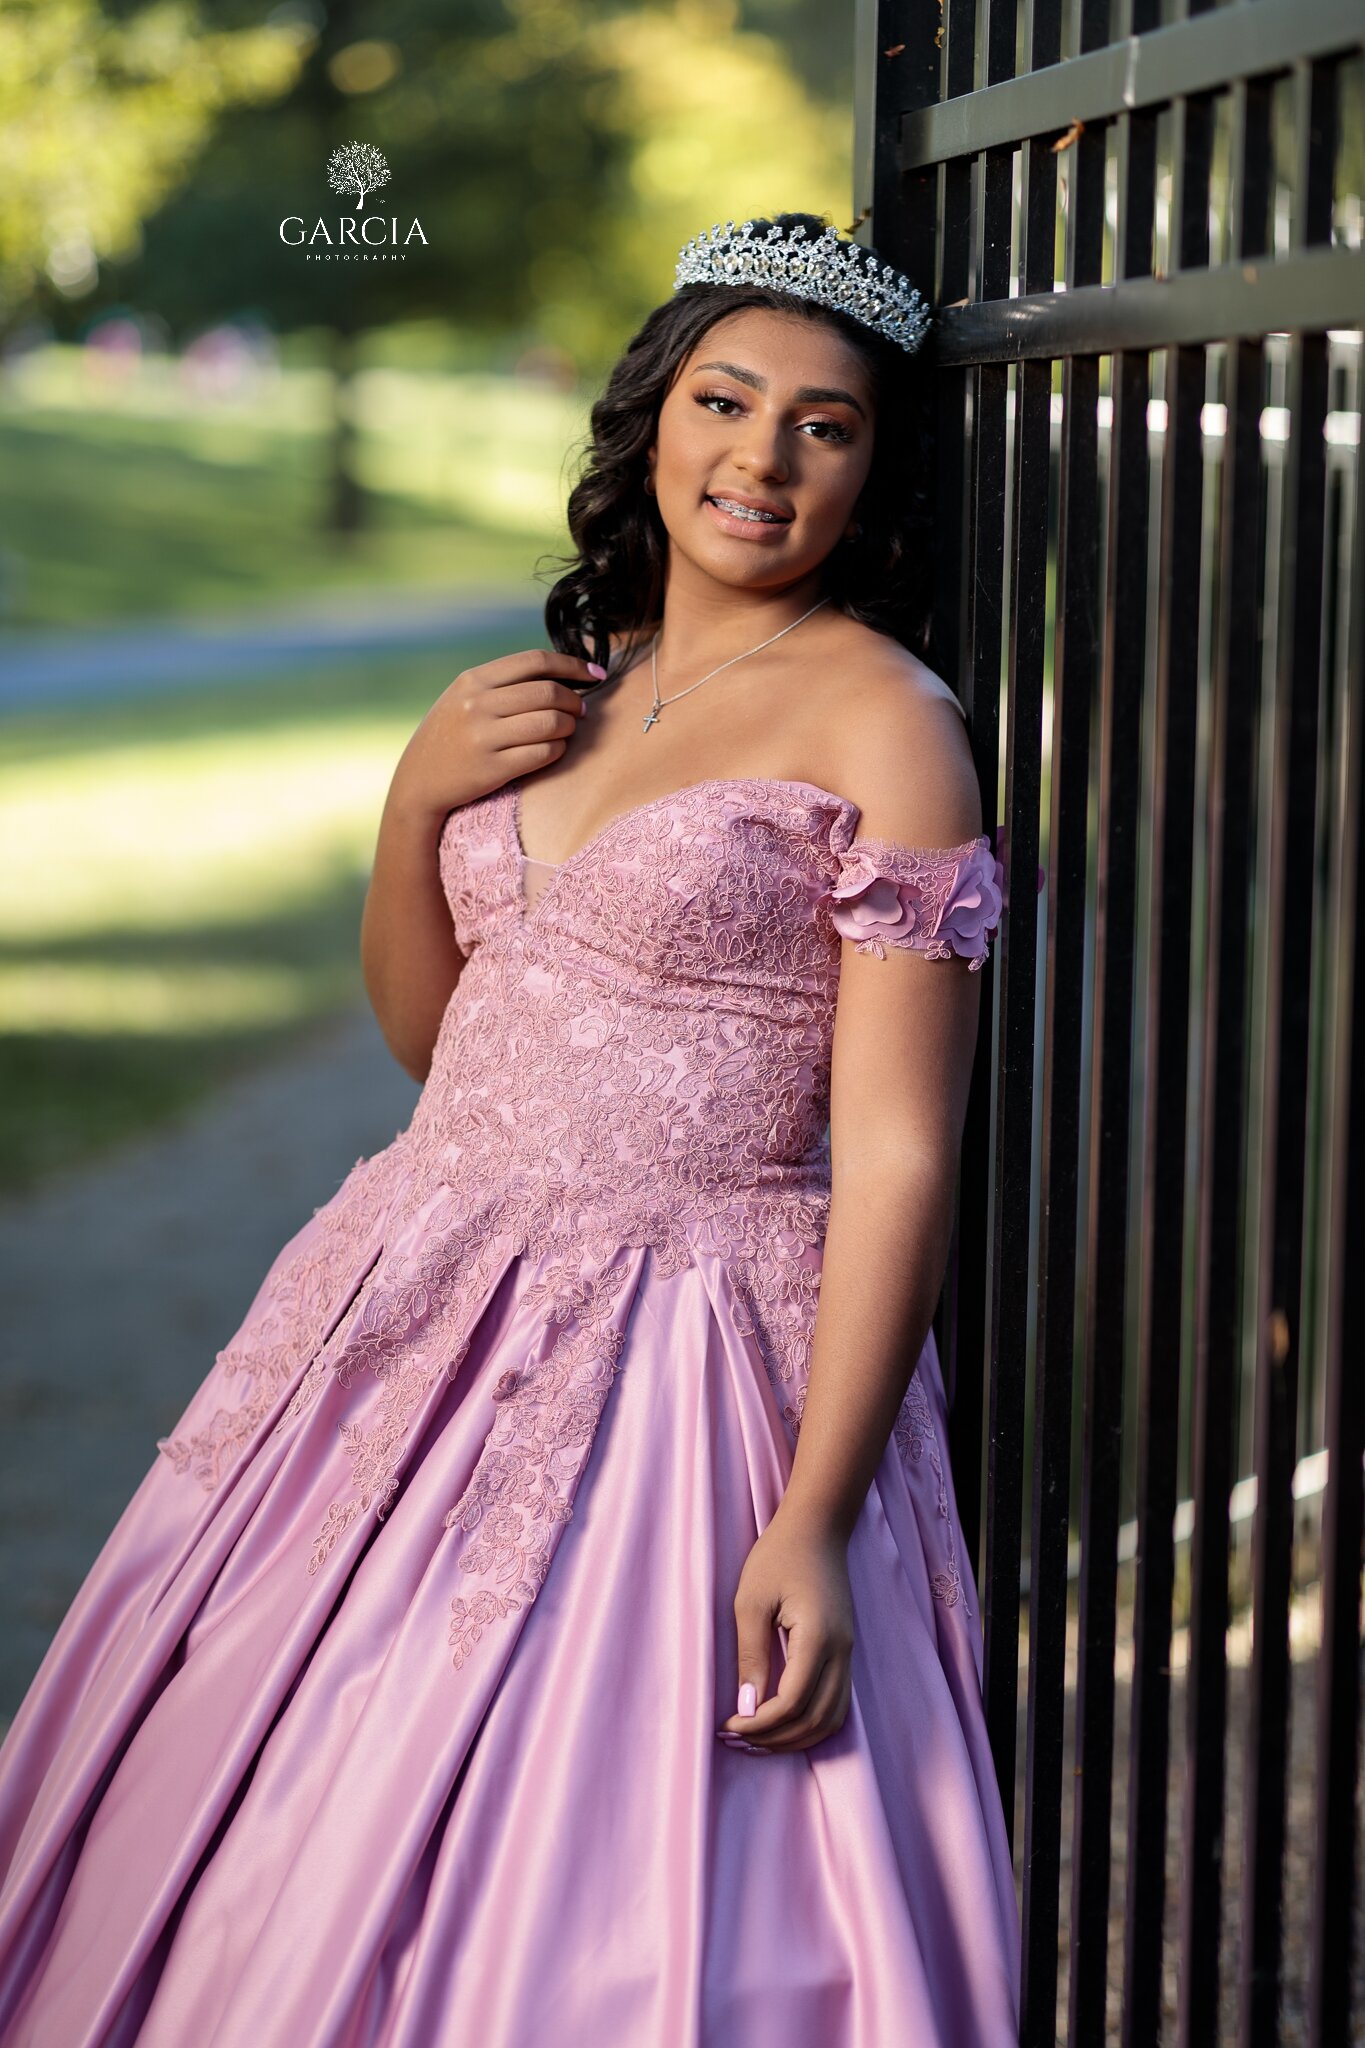 Windy-Taveras-Quince-Session-Garcia-Photography-7045.jpg